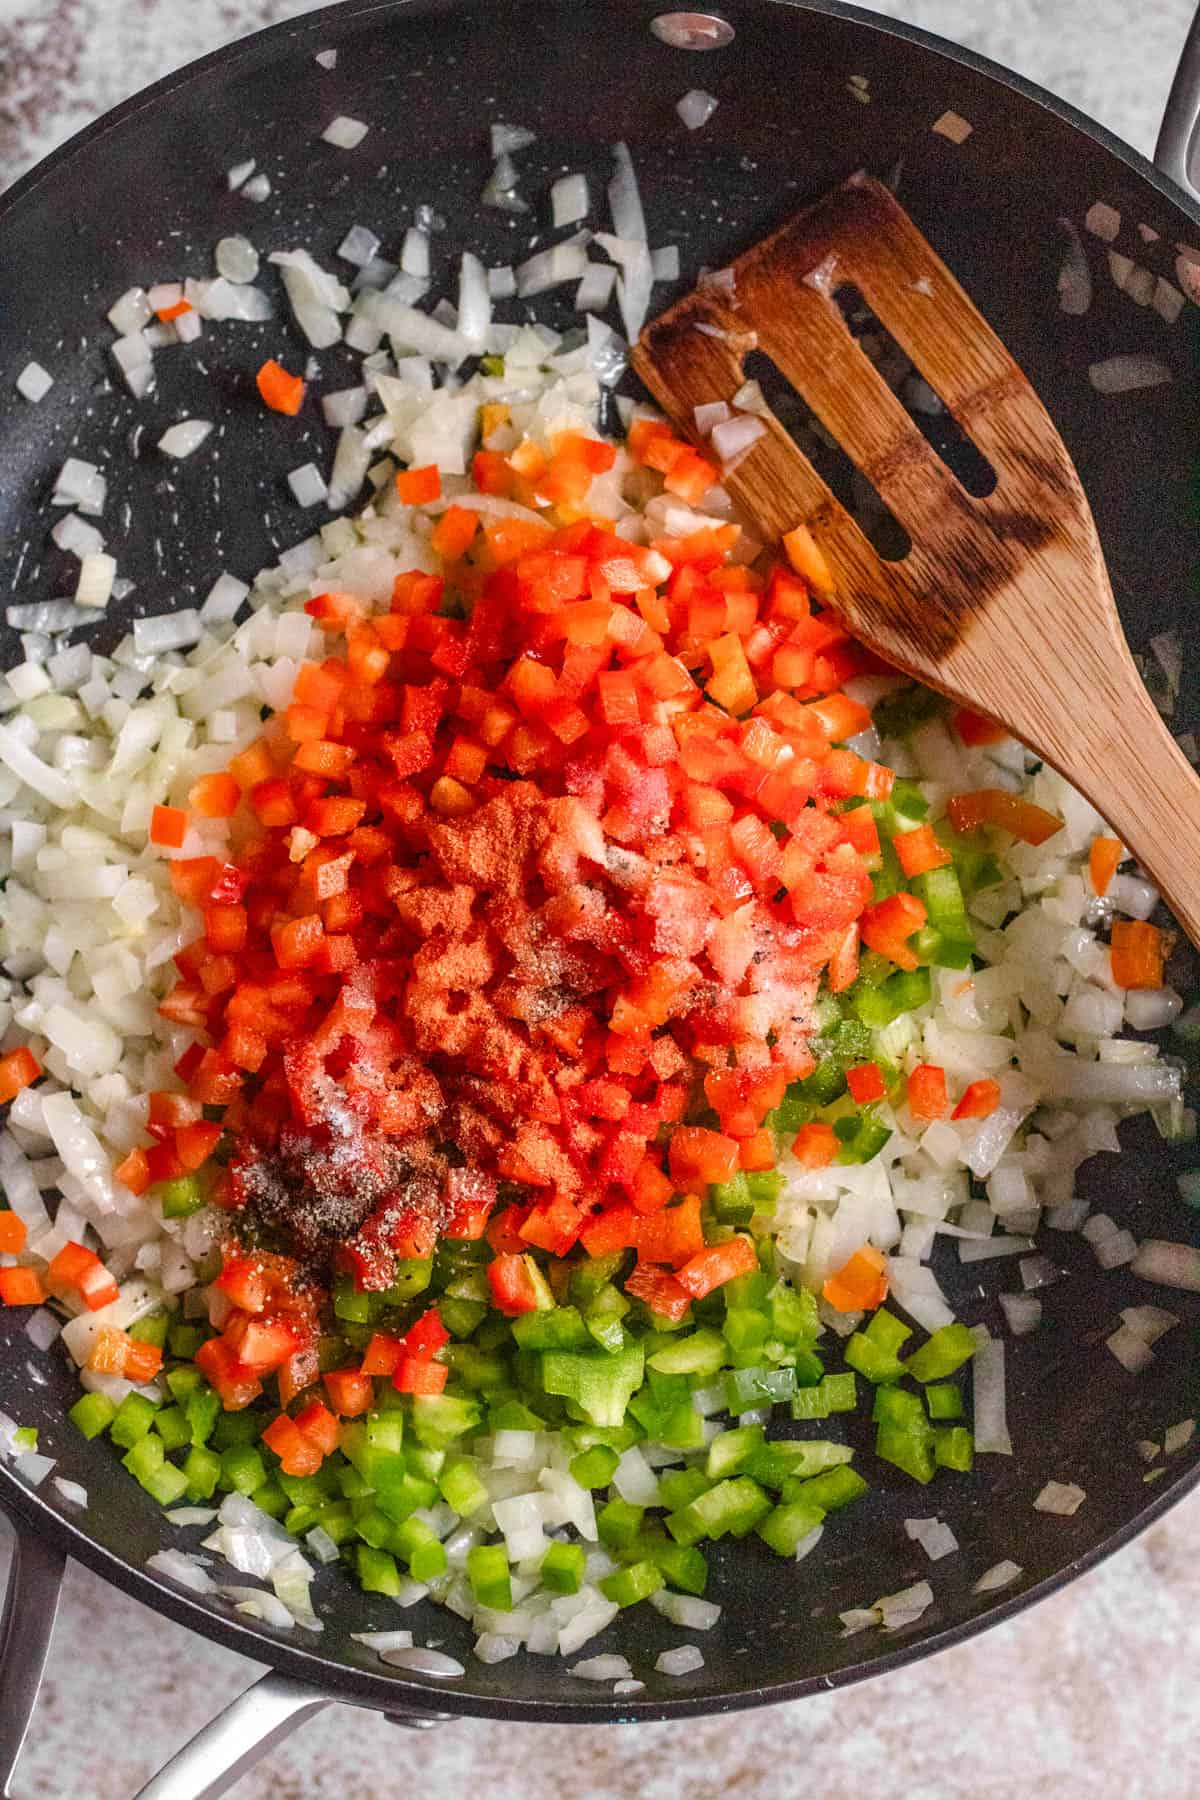 Diced vegetables to prepare the sofrito inside the skillet. 